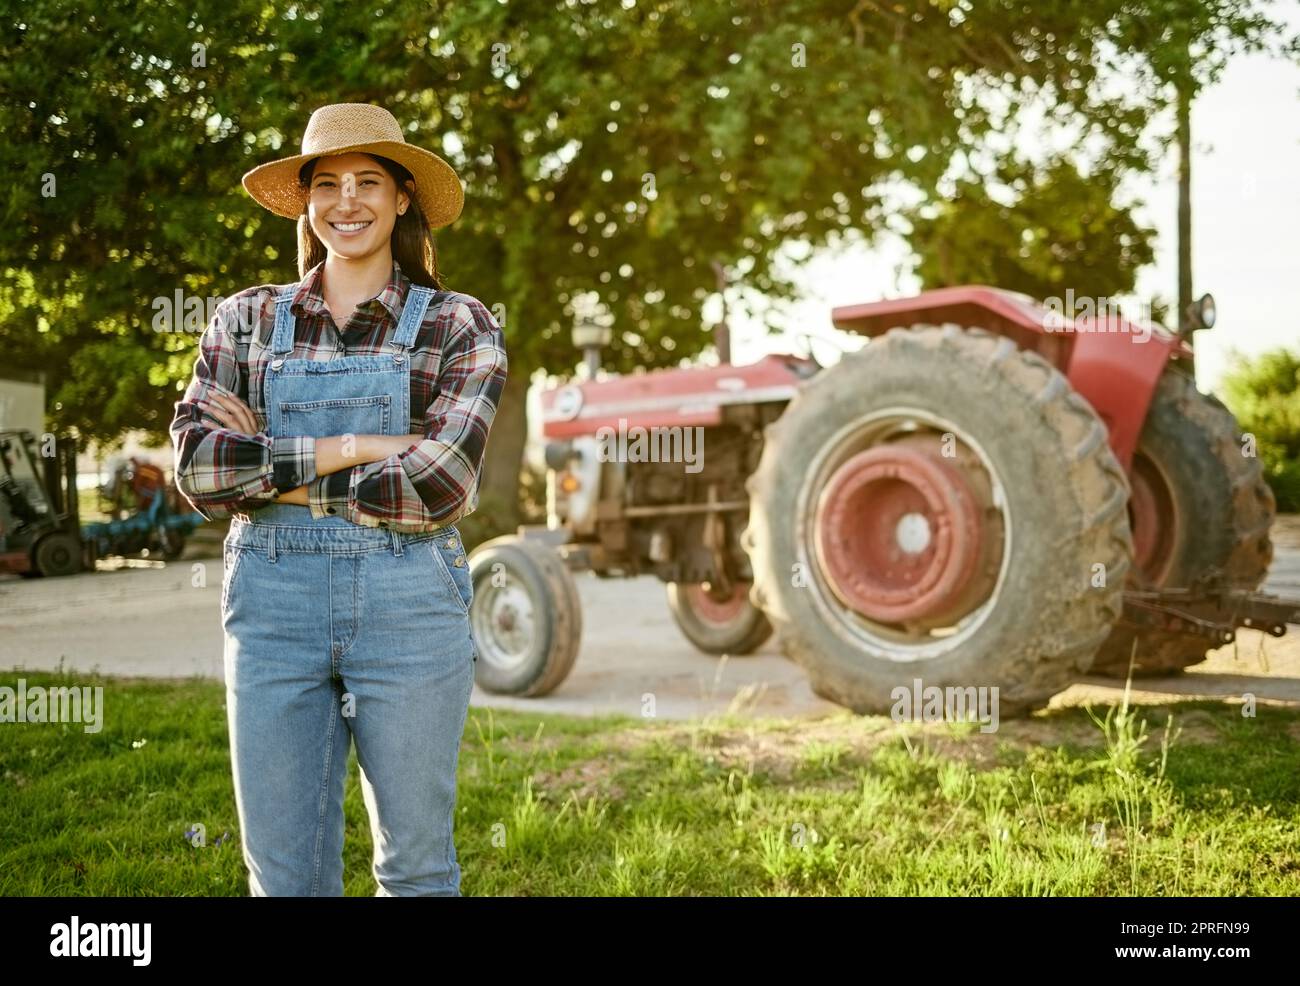 Farm, agriculture and tractor with a young woman farmer standing outside in the farming industry. Sustainability, organic and eco friendly agricultural harvest during summer or spring harvest season Stock Photo